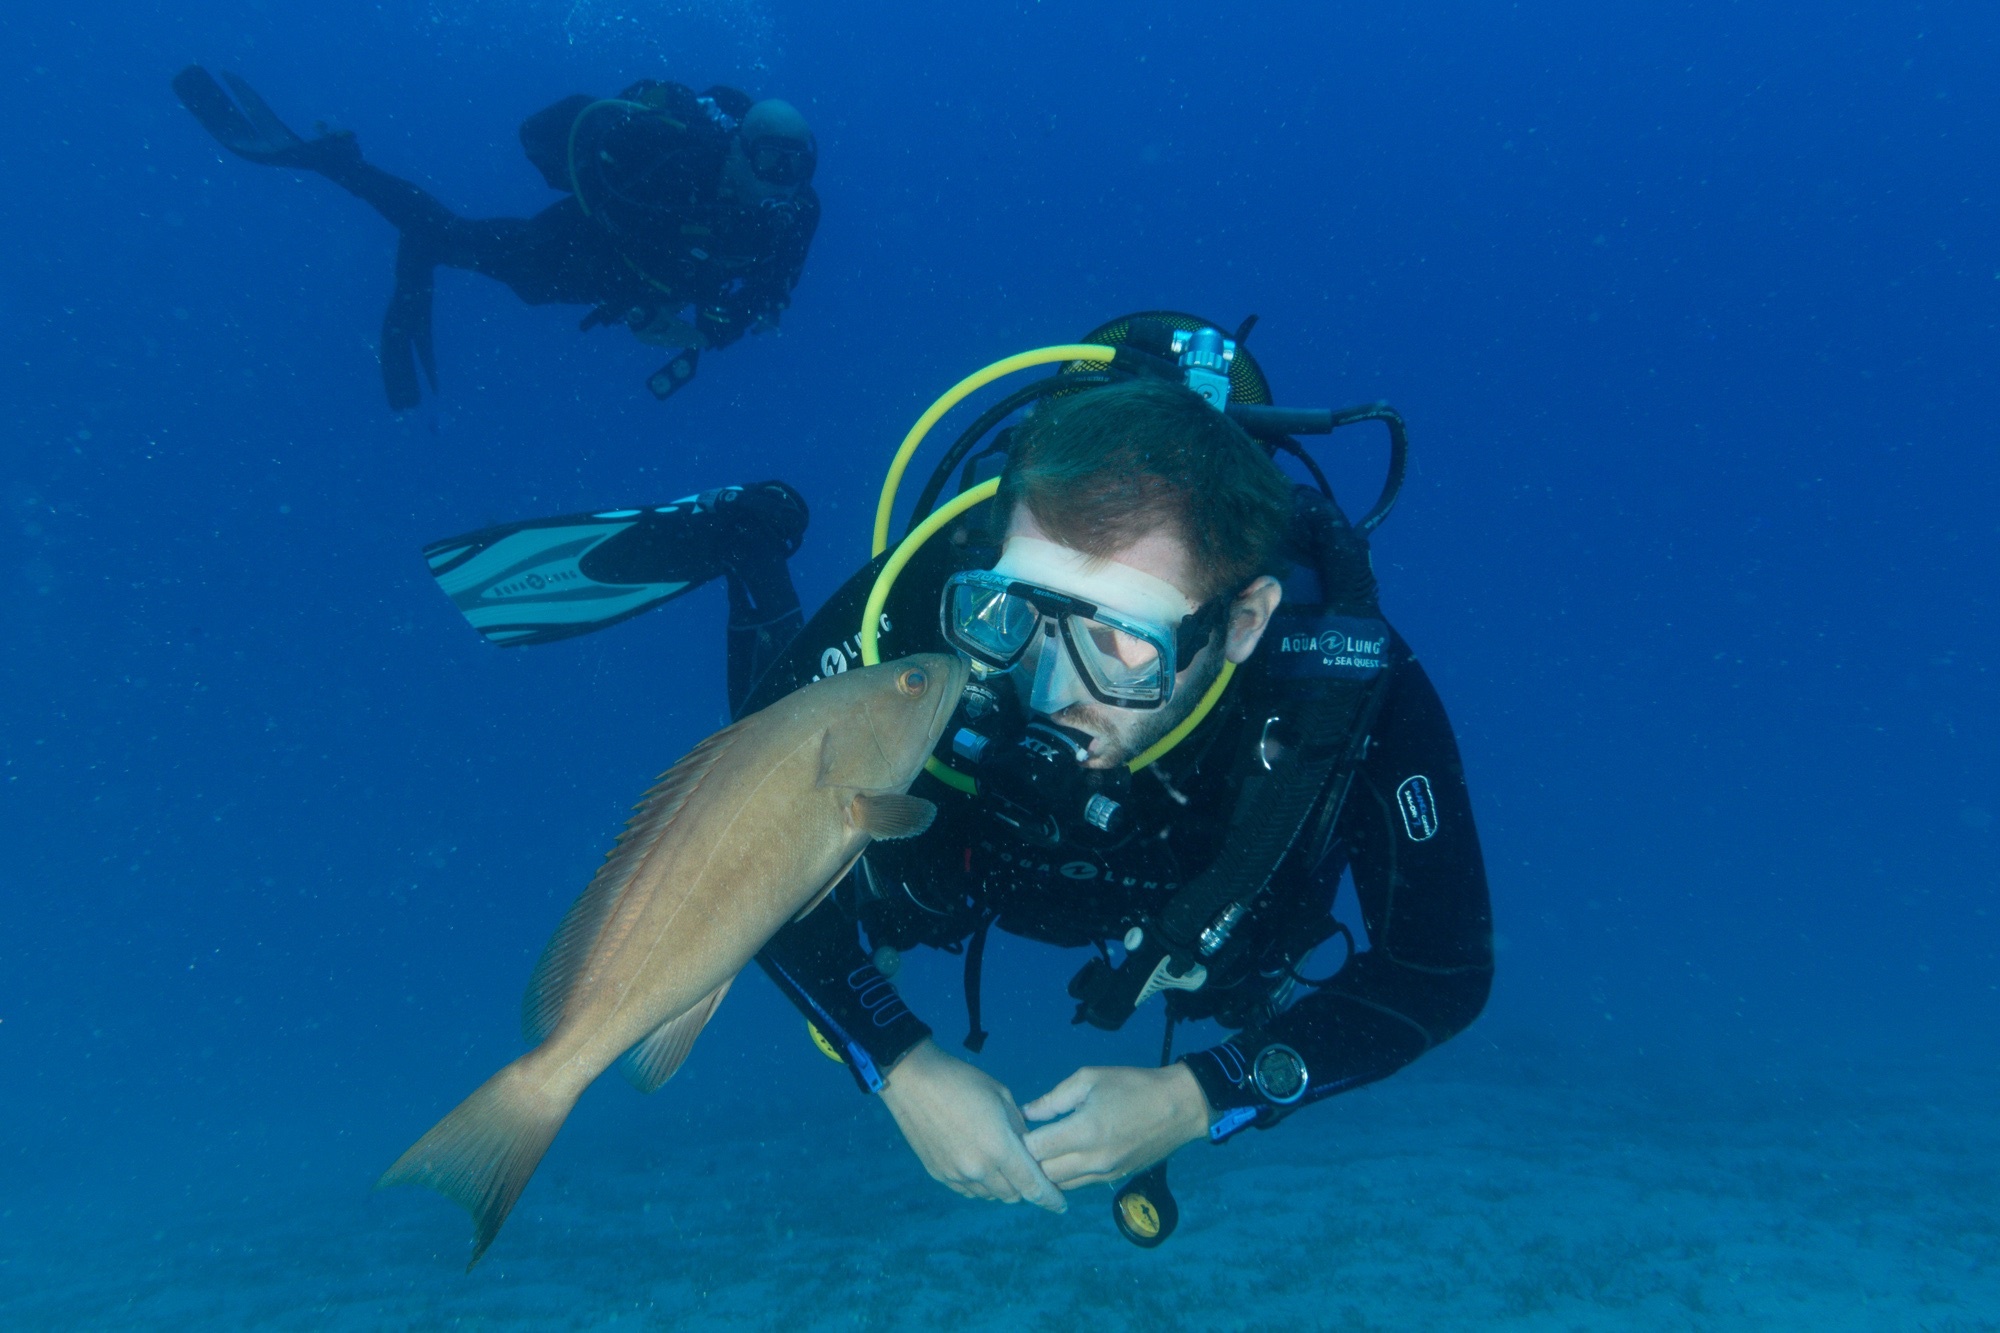 Scuba Diving: Marine biology specimen in front of the diver's face, Incredible underwater world. 2000x1340 HD Background.